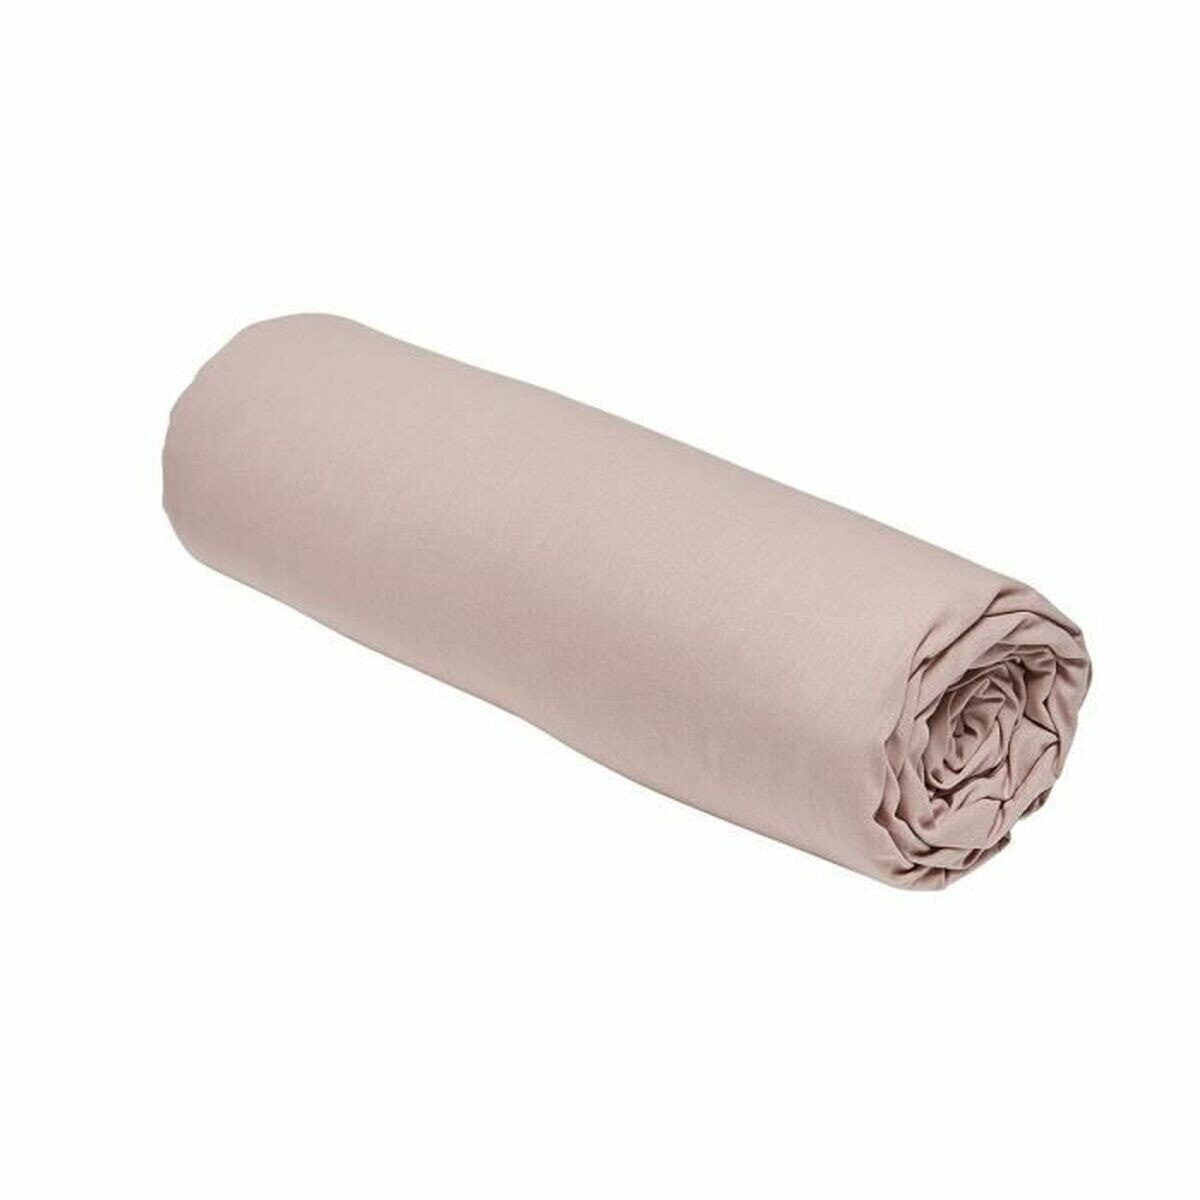 Fitted bottom sheet TODAY Essential 140 x 200 cm Light Pink